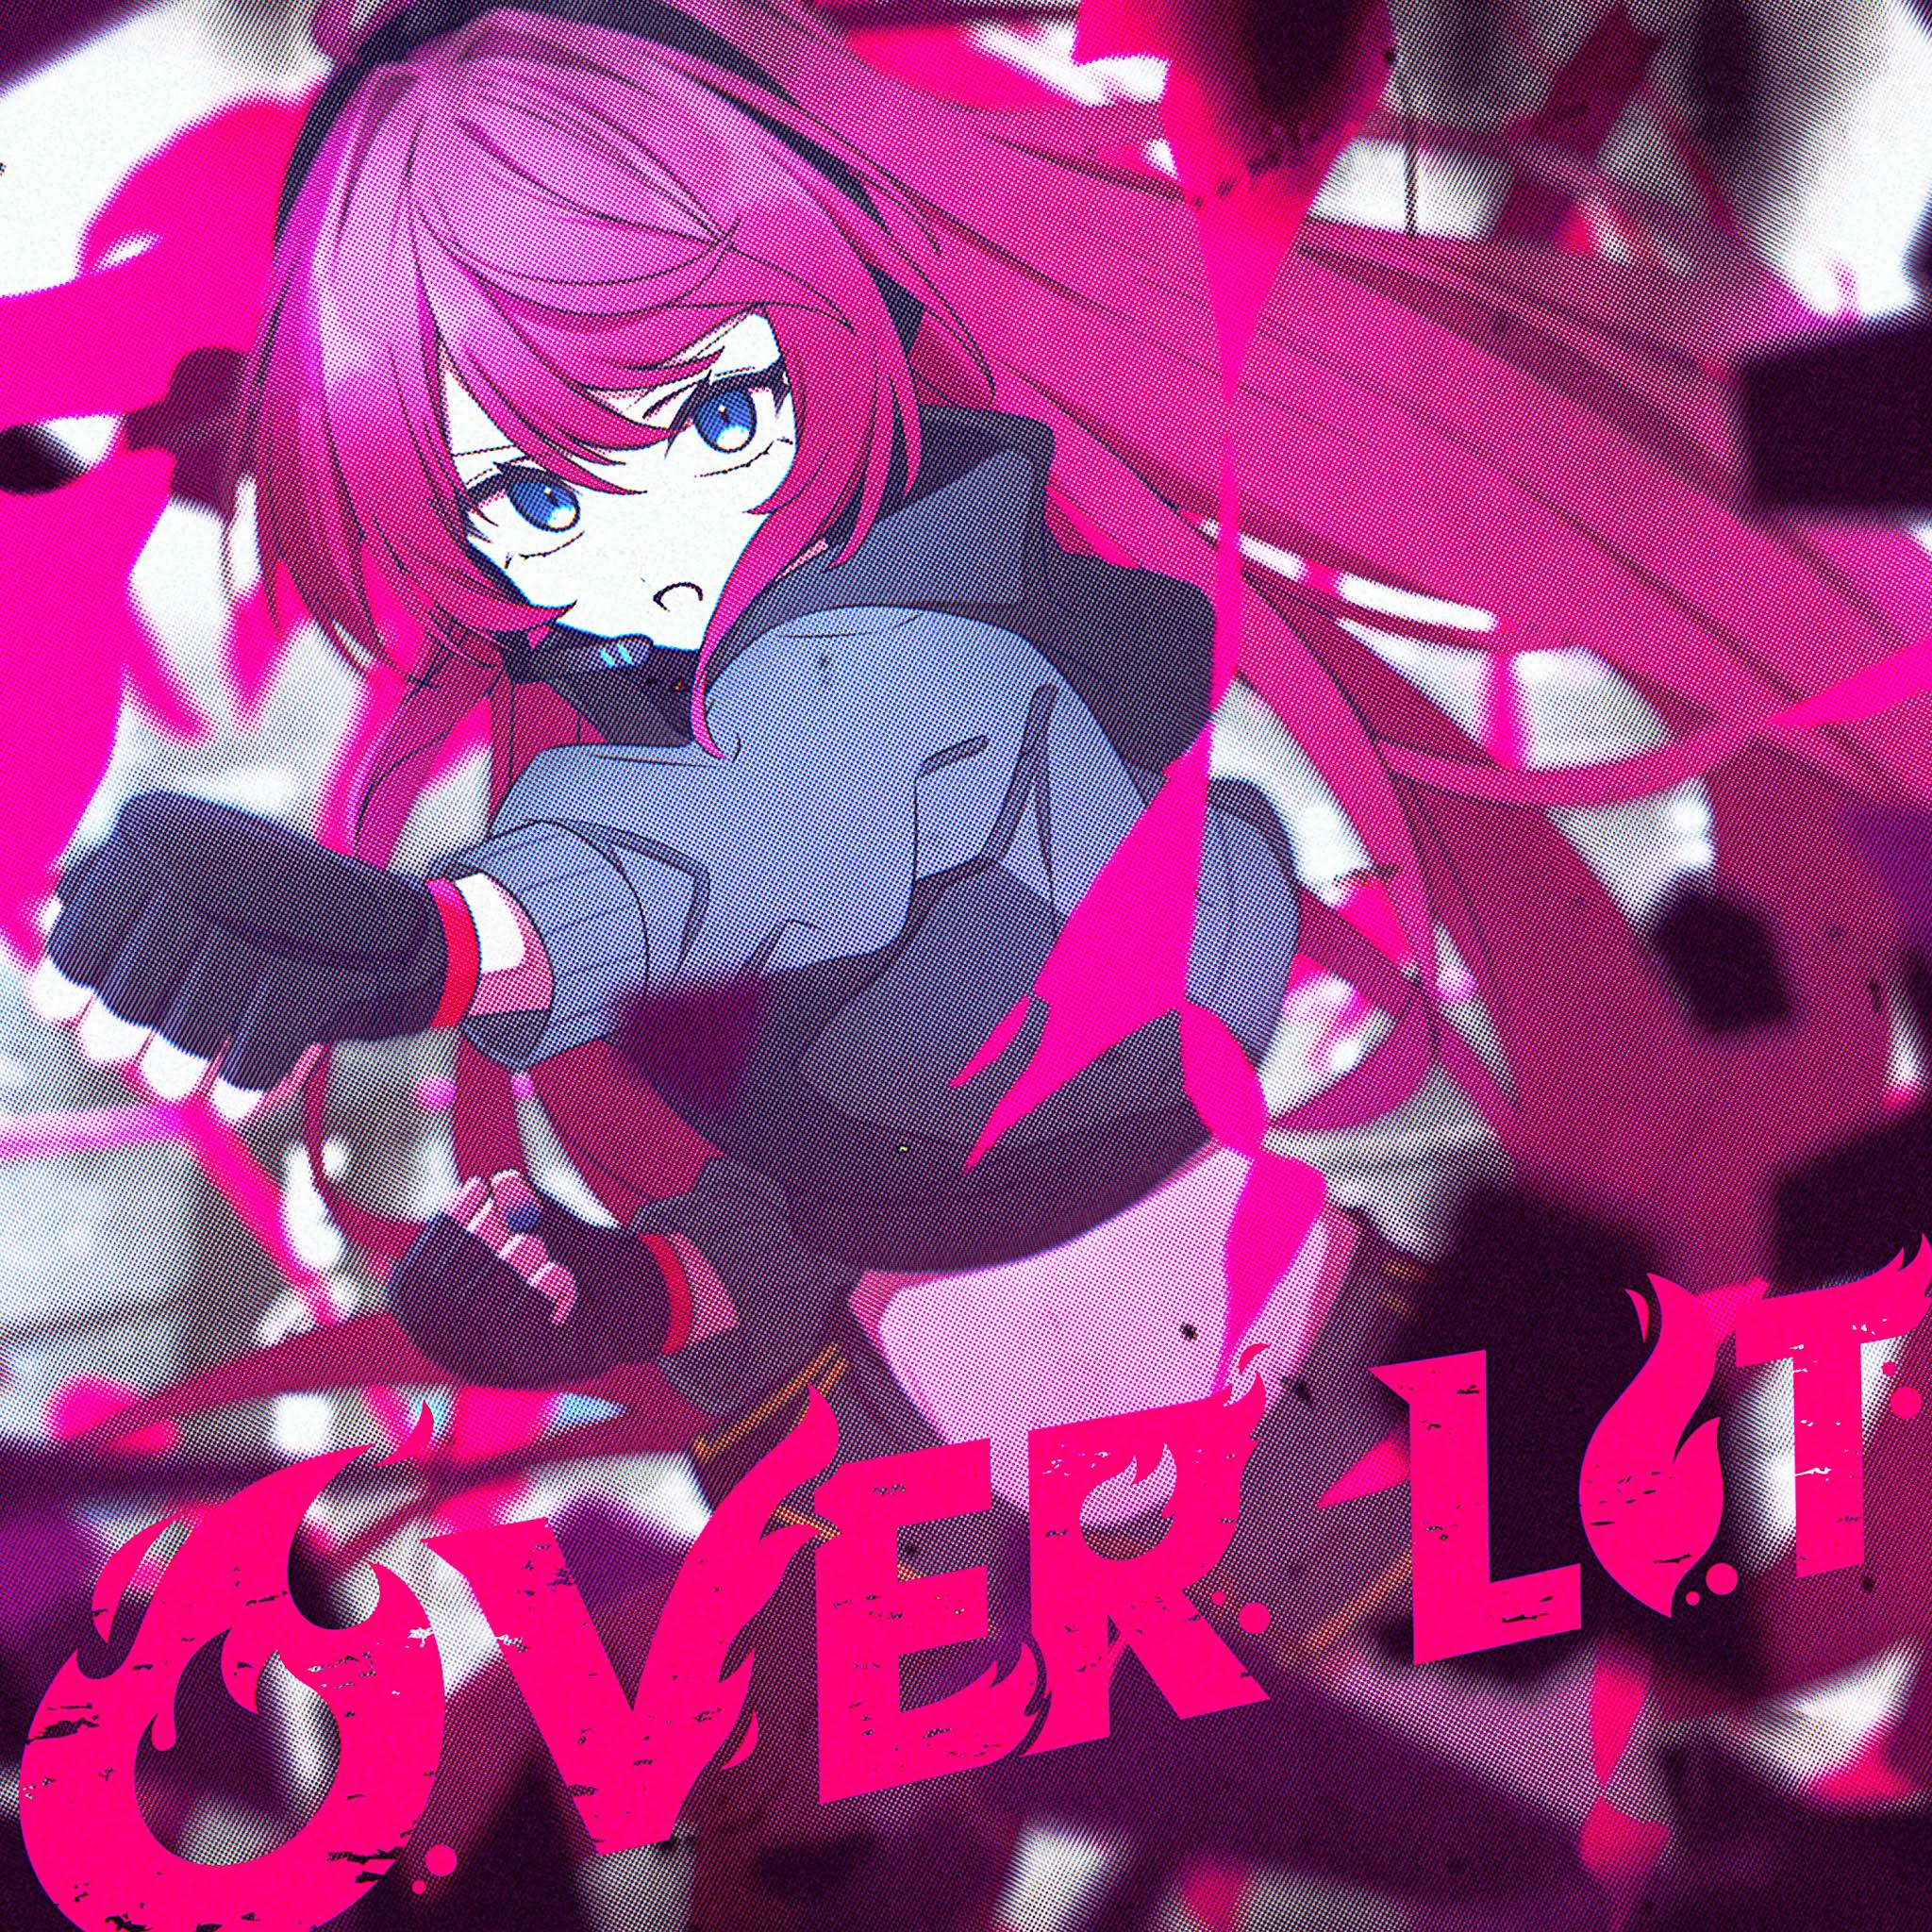 OVER LIT - 書店太郎, B.E.R feat. 巡音ルカ, 巡音ルカ V4X (Unknown 